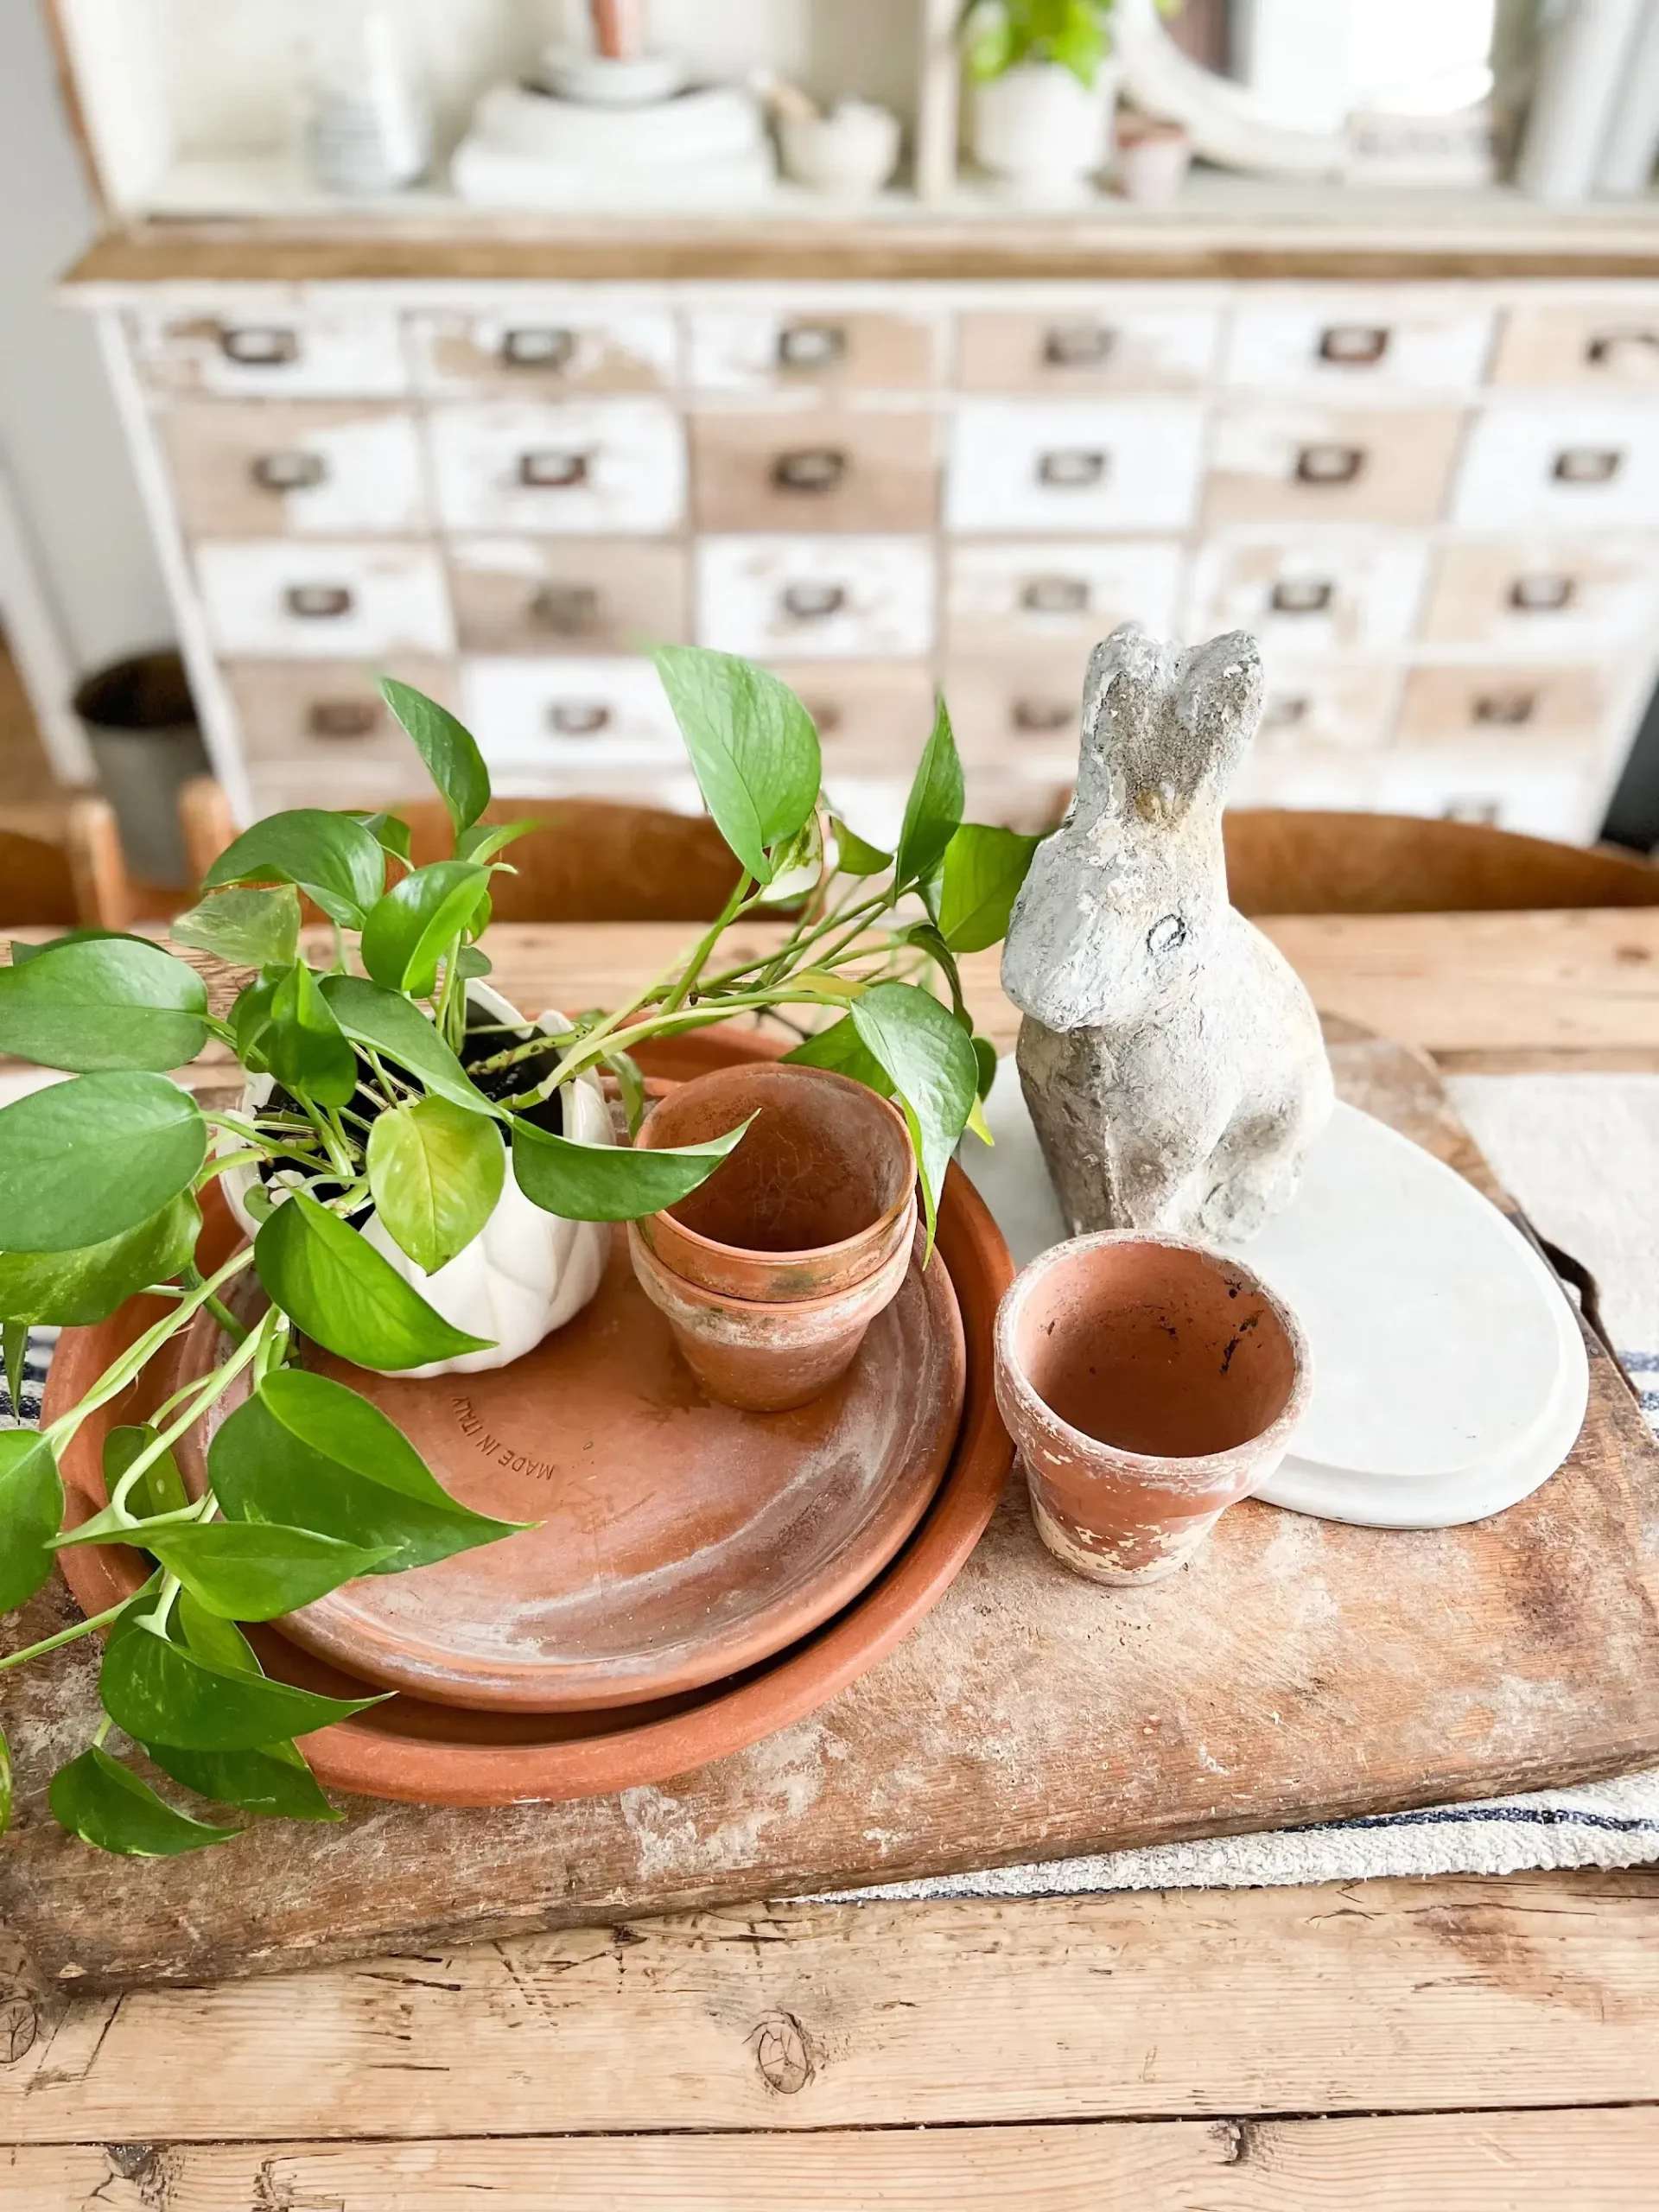 terracotta saucers and pots styled with a concrete bunny and pothos plant